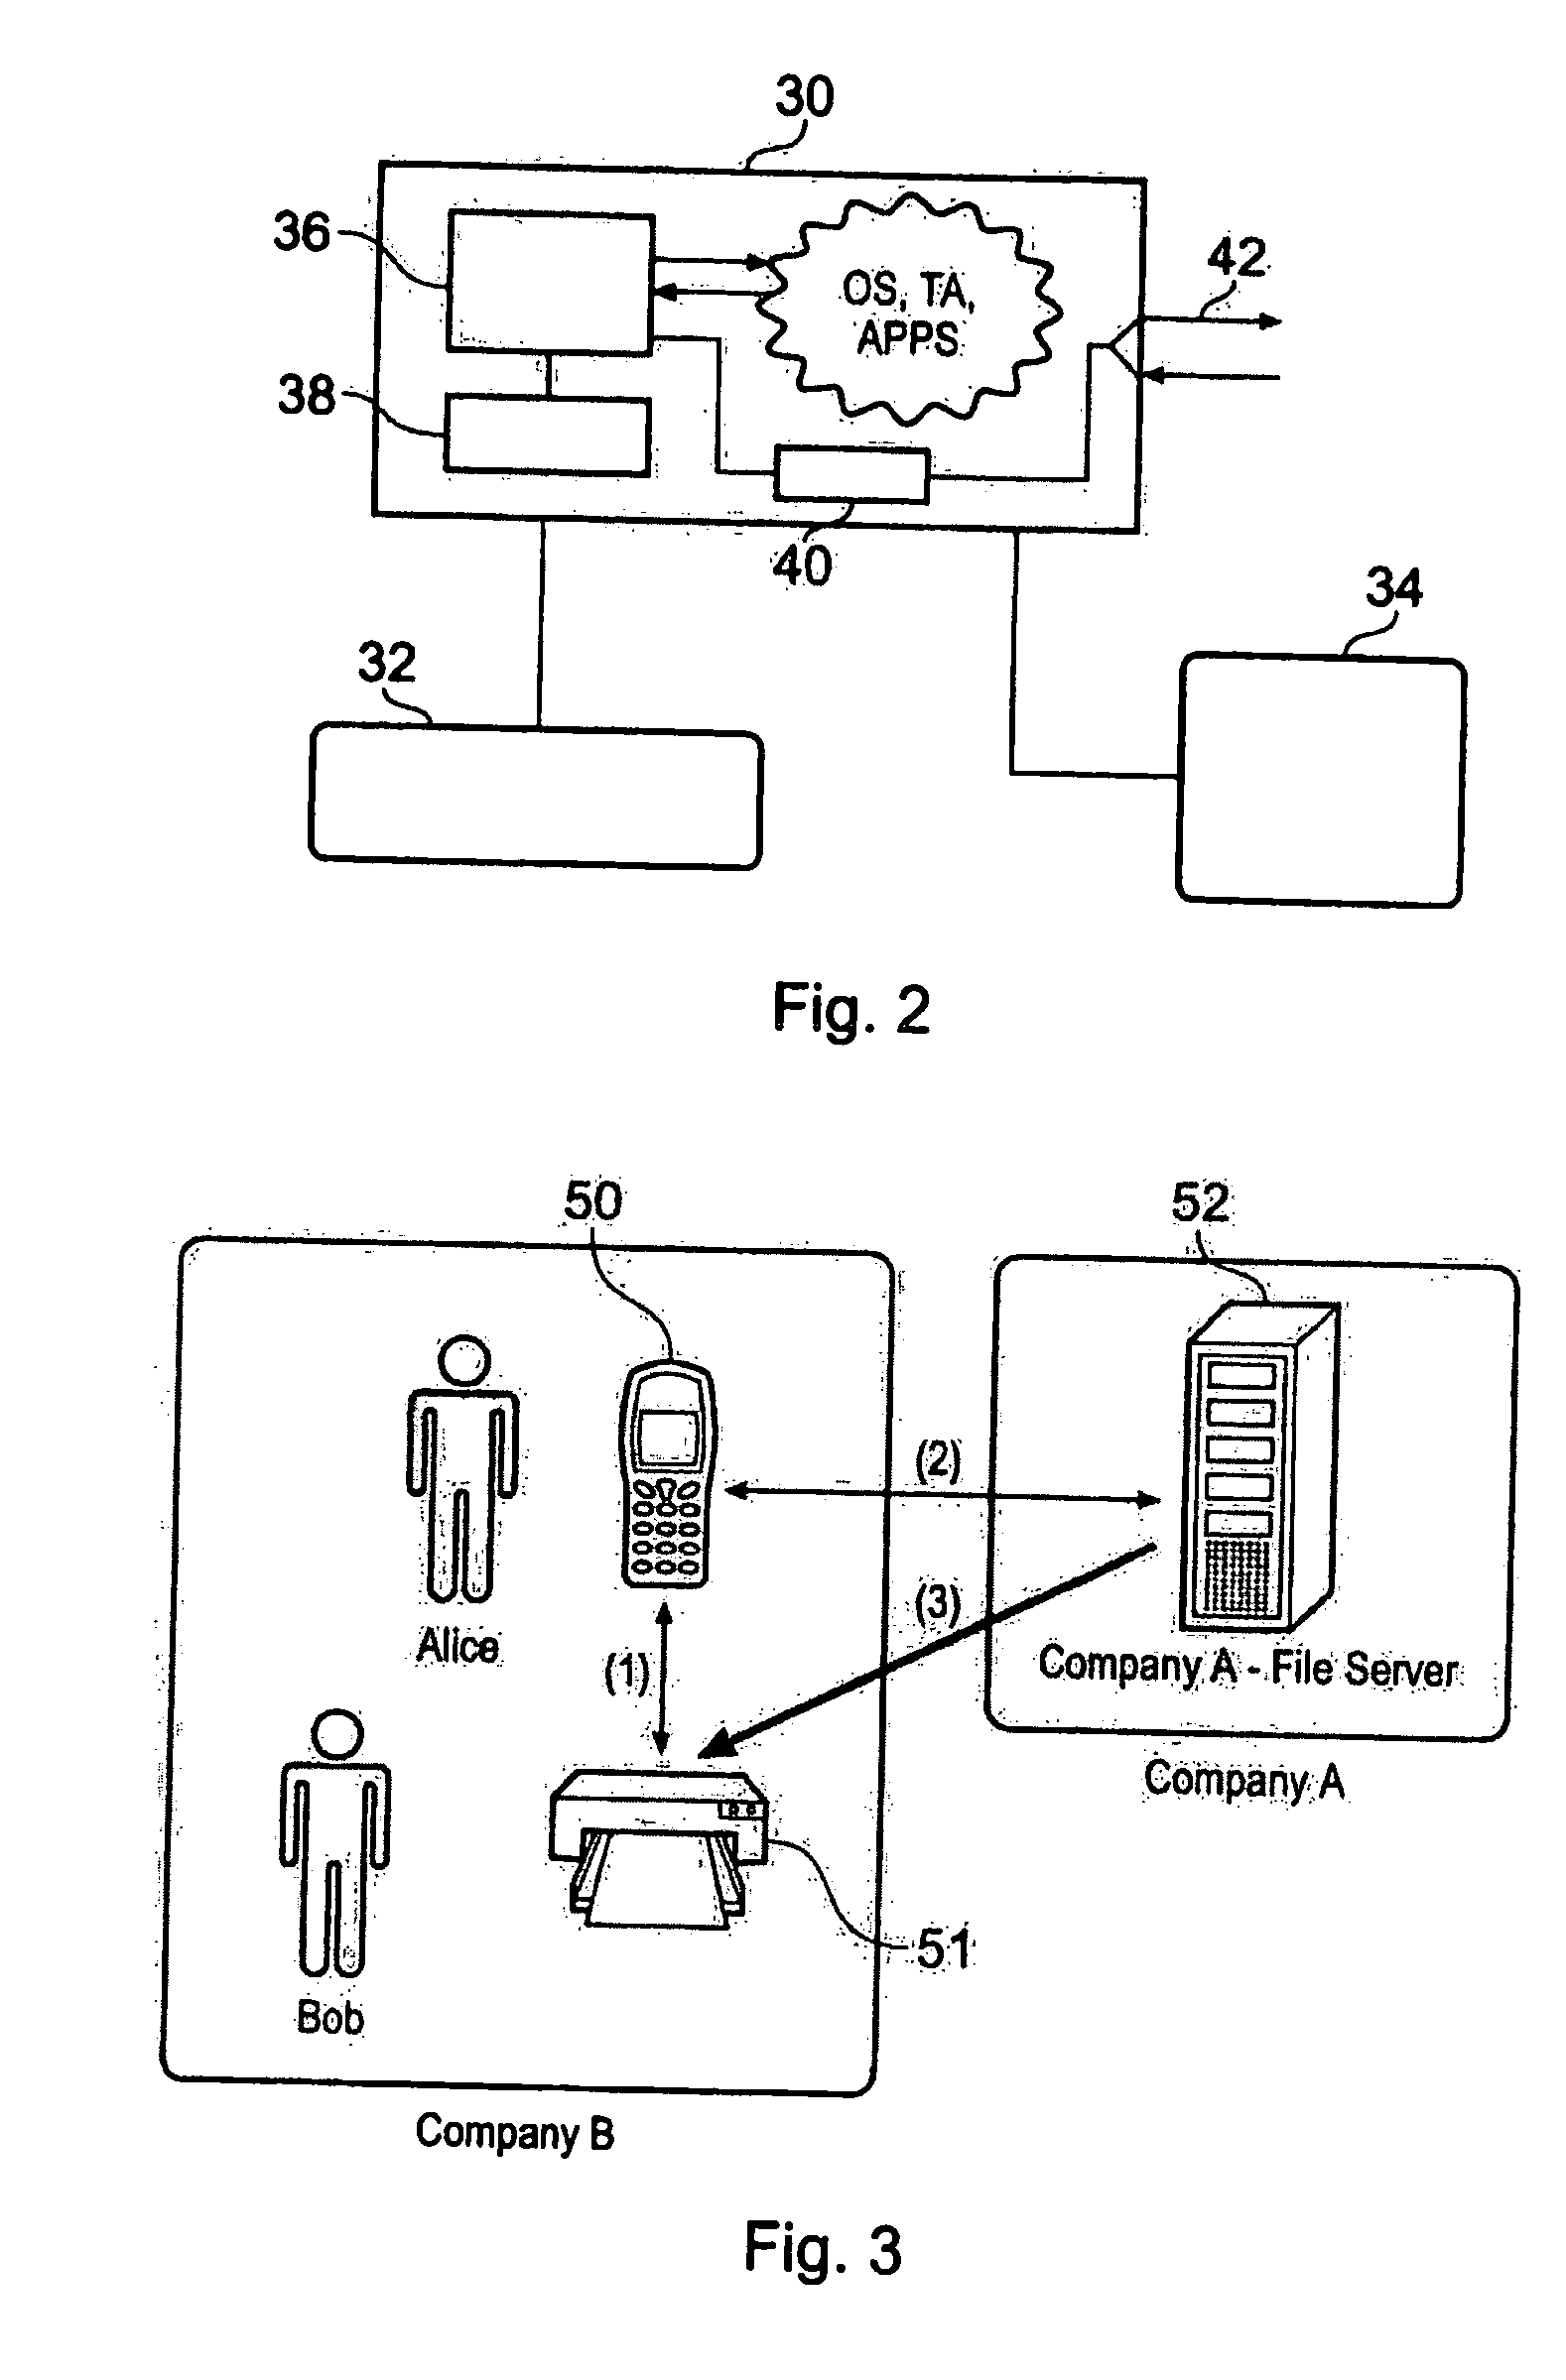 Apparatus for and method of evaluating security within a data processing or transactional environment